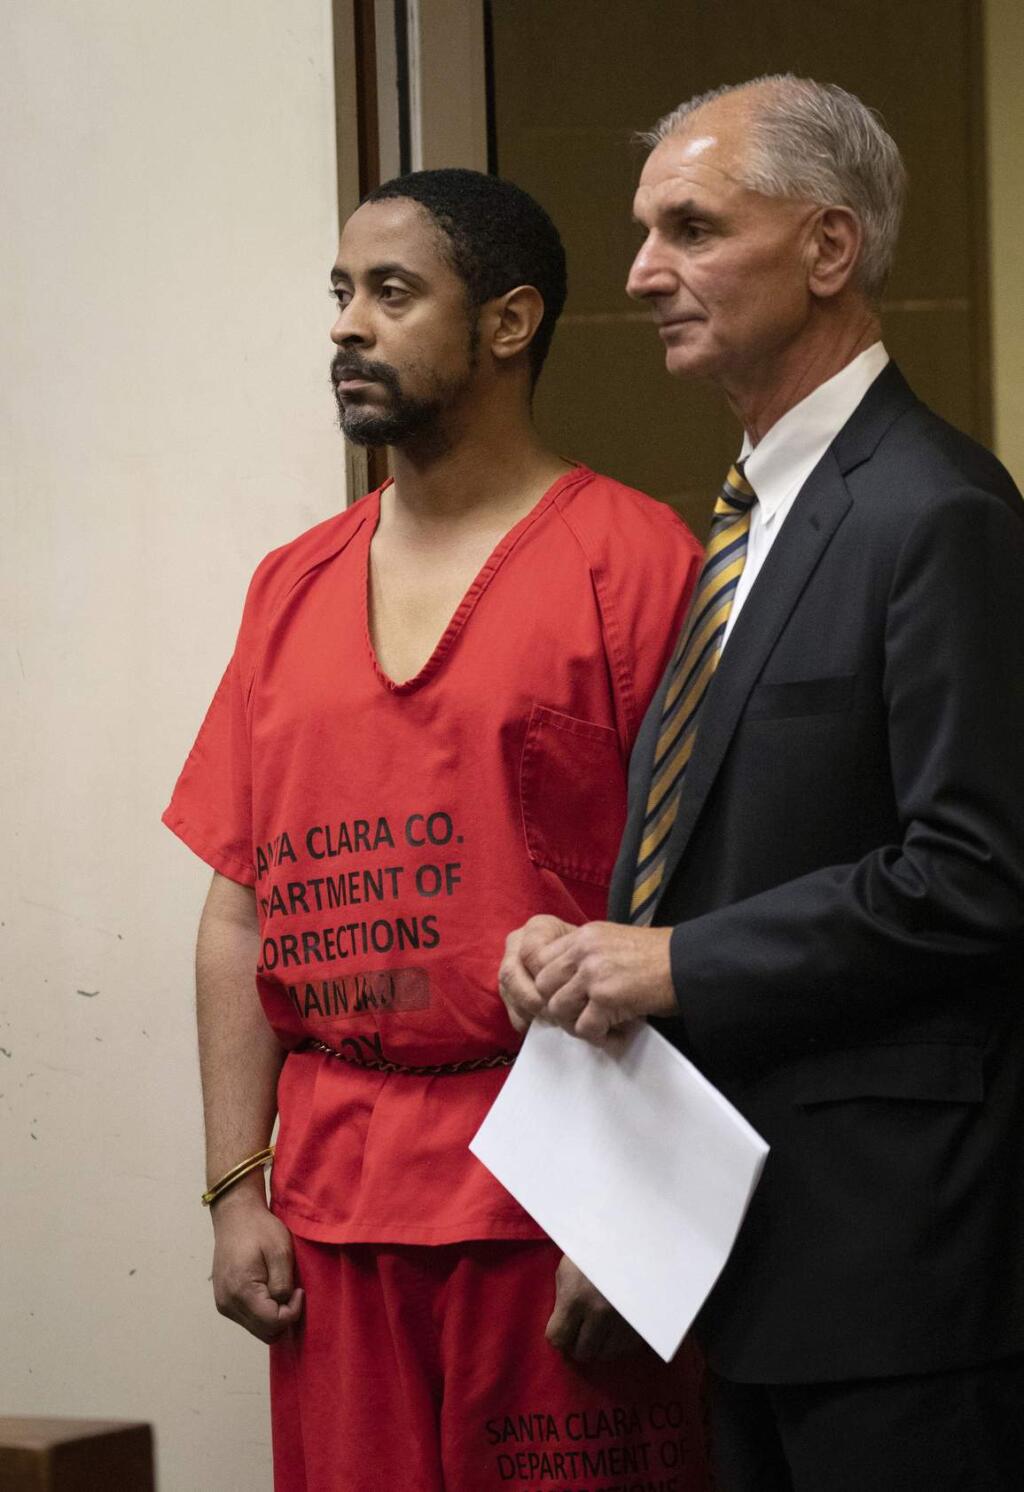 Isaiah J. Peoples appears for his arraignment in Santa Clara County Superior Court as his lawyer, Chuck Smith, stands at his side on Friday, April 26, 2019, in San Jose, Calif. The former U.S. Army sharpshooter Peoples is charged with eight counts of attempted murder after authorities say he deliberately plowed his car into pedestrians Tuesday. (Jim Gensheimer/San Francisco Chronicle via AP, Pool)